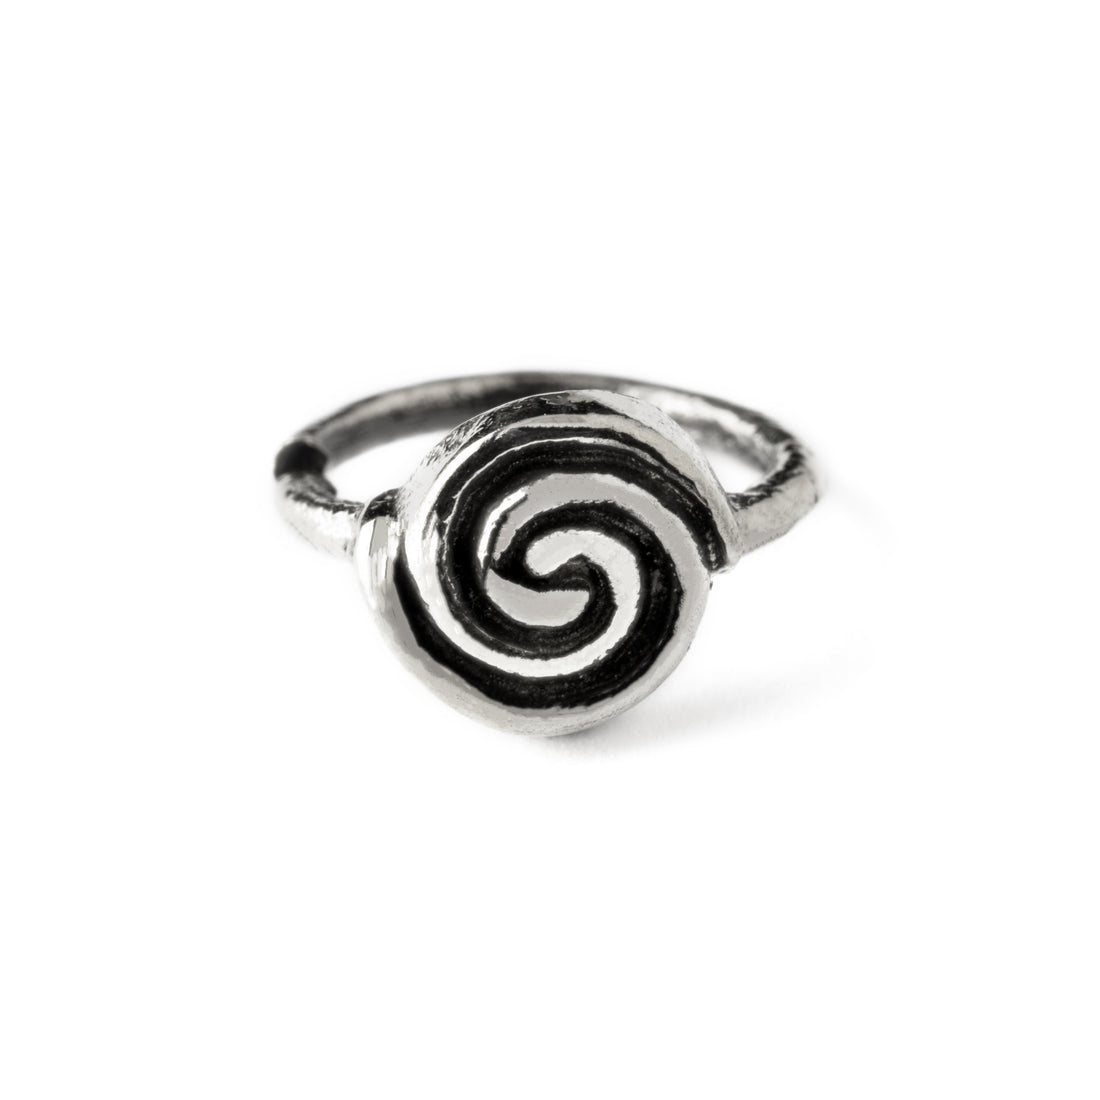 Silver spiral nose ring frontal view